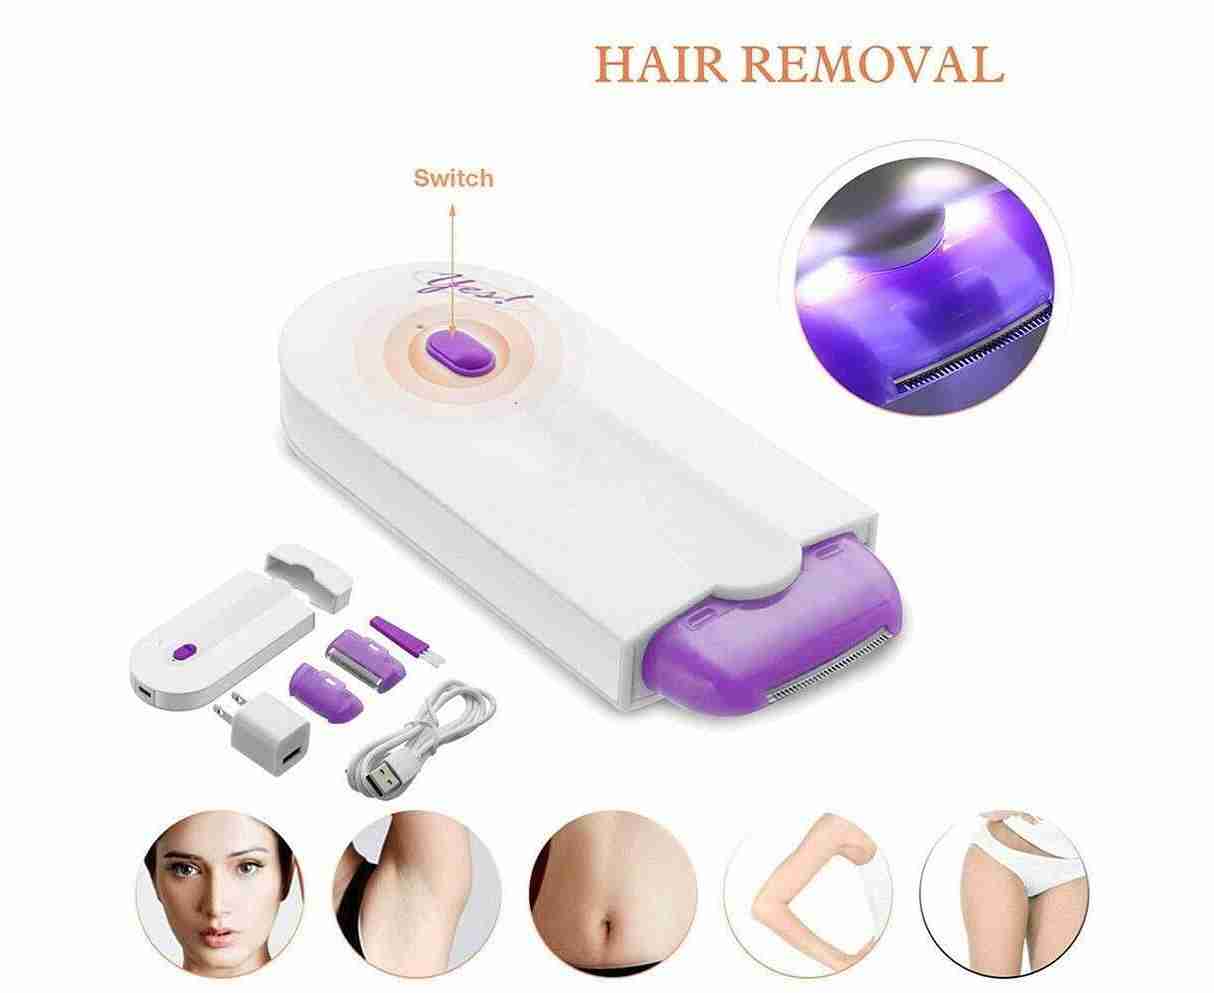 SkinCare™ - Rechargable Laser Hair Removal Device